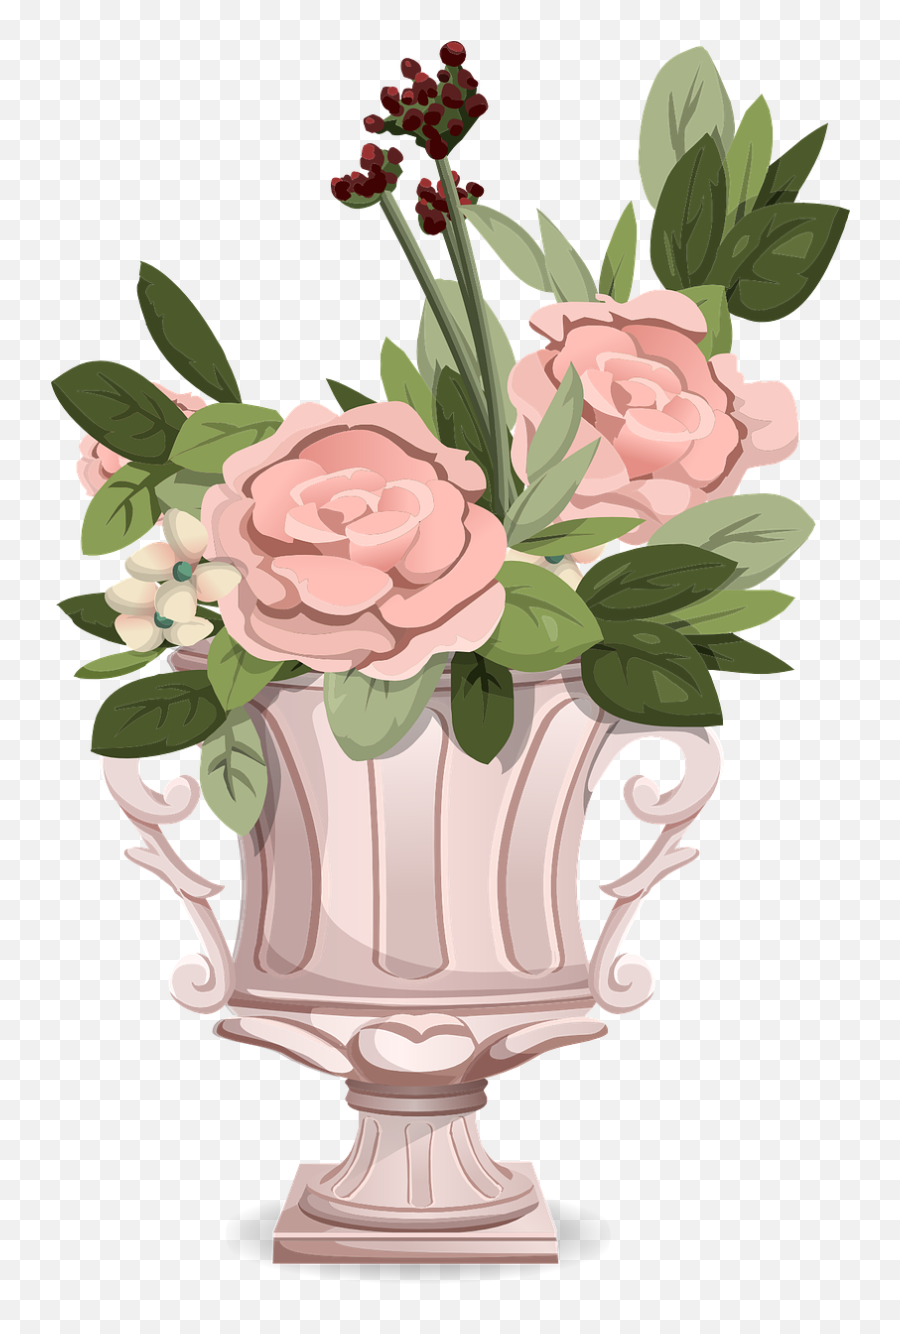 Bouquet Flowers Roses - Free Vector Graphic On Pixabay Flower Bouquet Png,Bouquet Of Roses Png